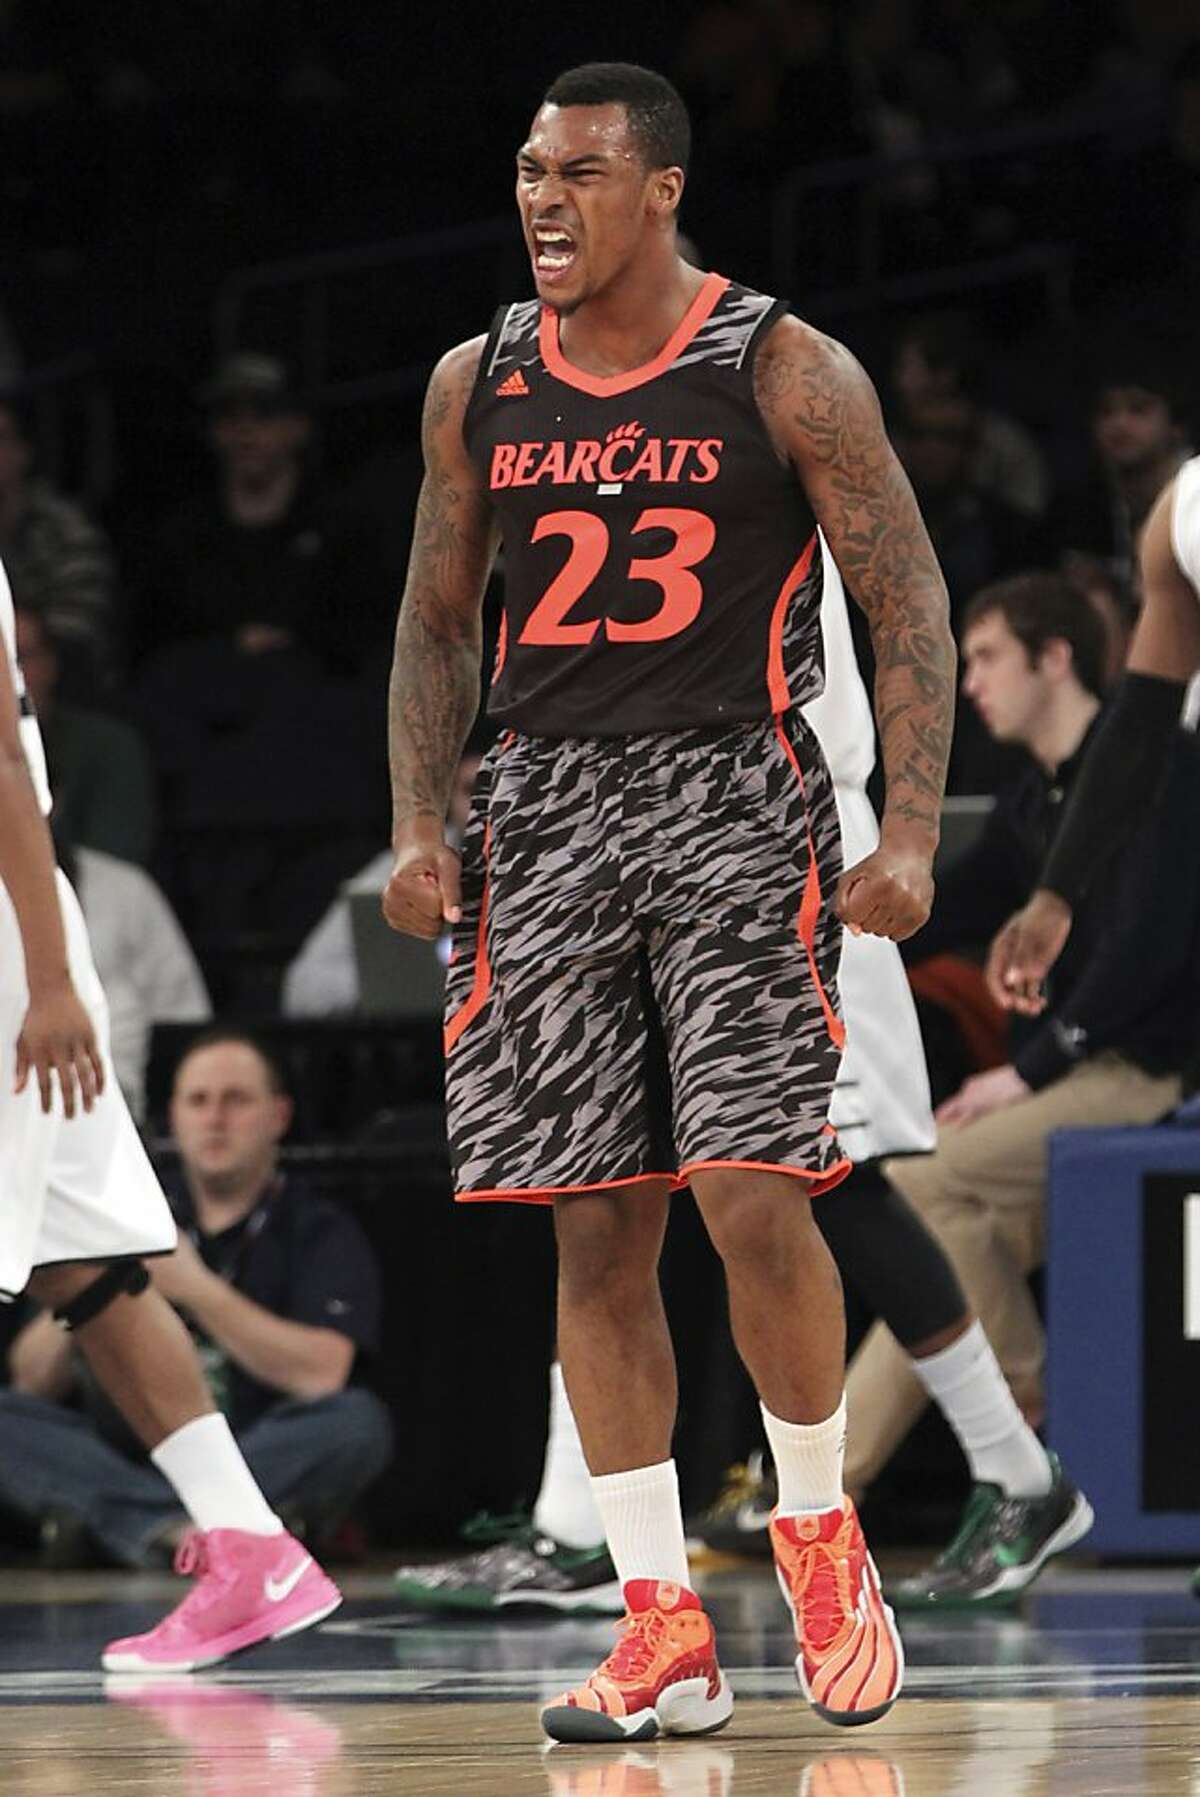 Cincinnati's Sean Kilpatrick reacts after making a basket during the first half of an NCAA college basketball game against Providence at the Big East Conference tournament, Wednesday, March 13, 2013 in New York. (AP Photo/Mary Altaffer)